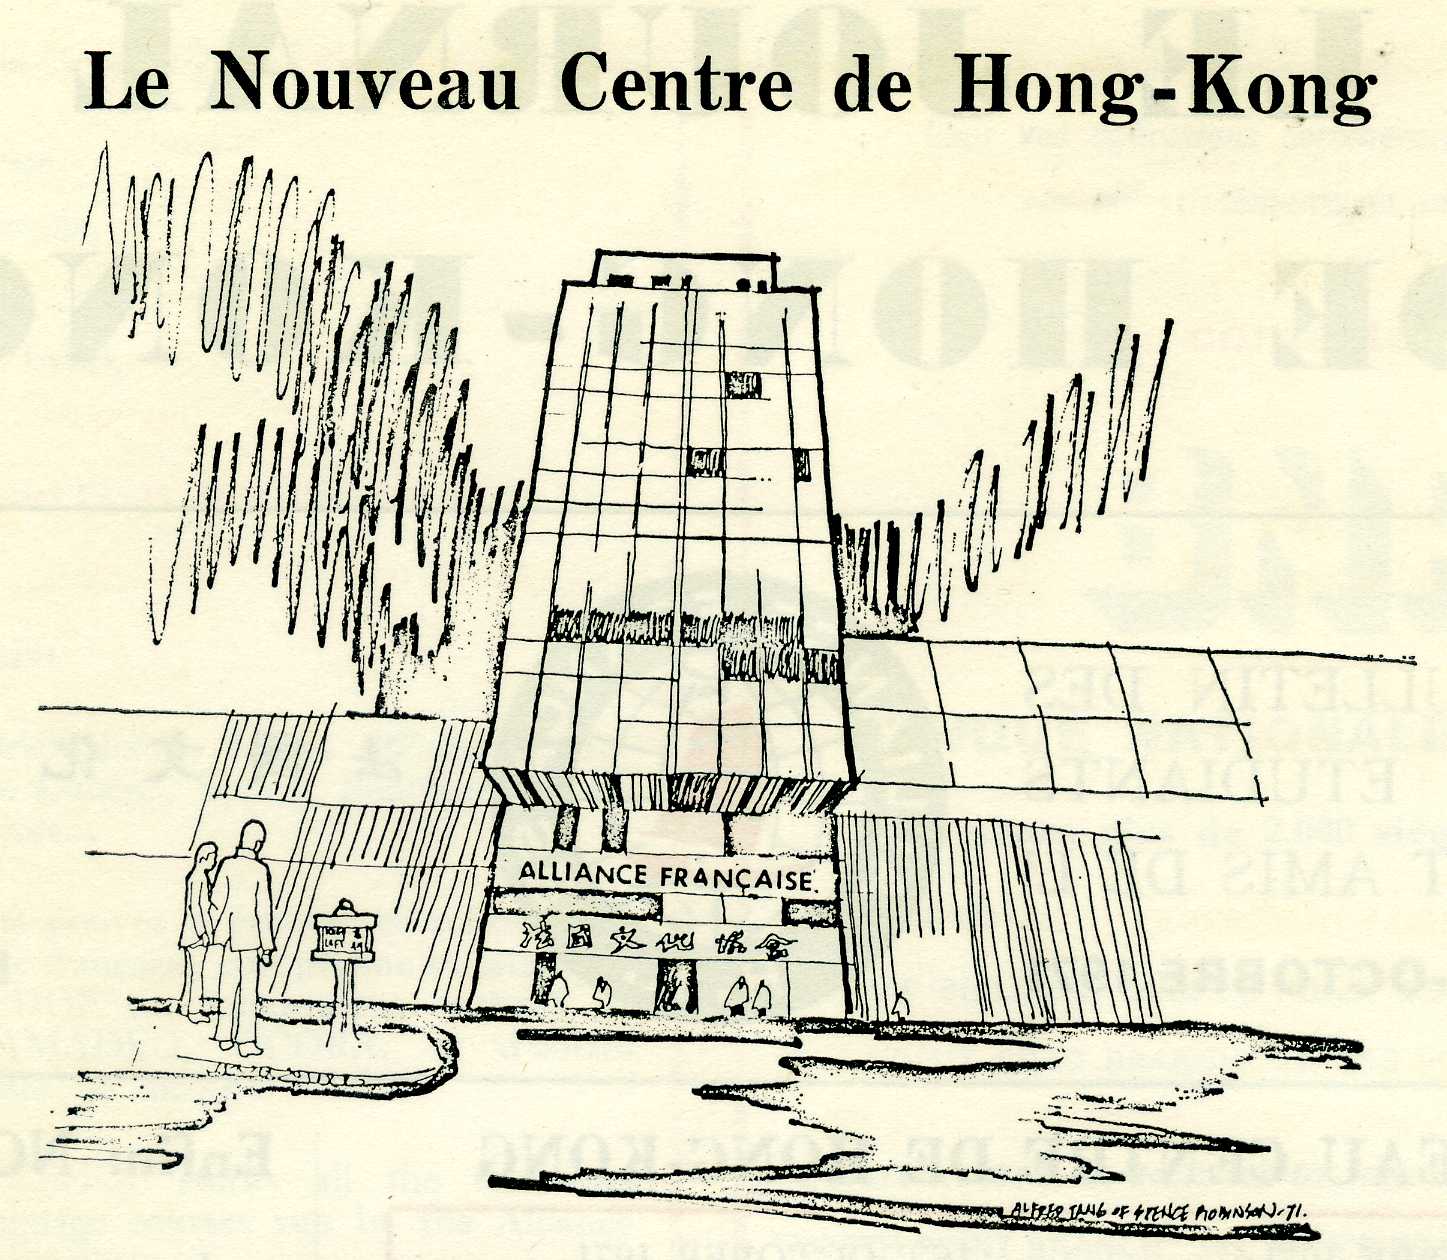 1971, is the year of the settlement of the Wan Chai center.